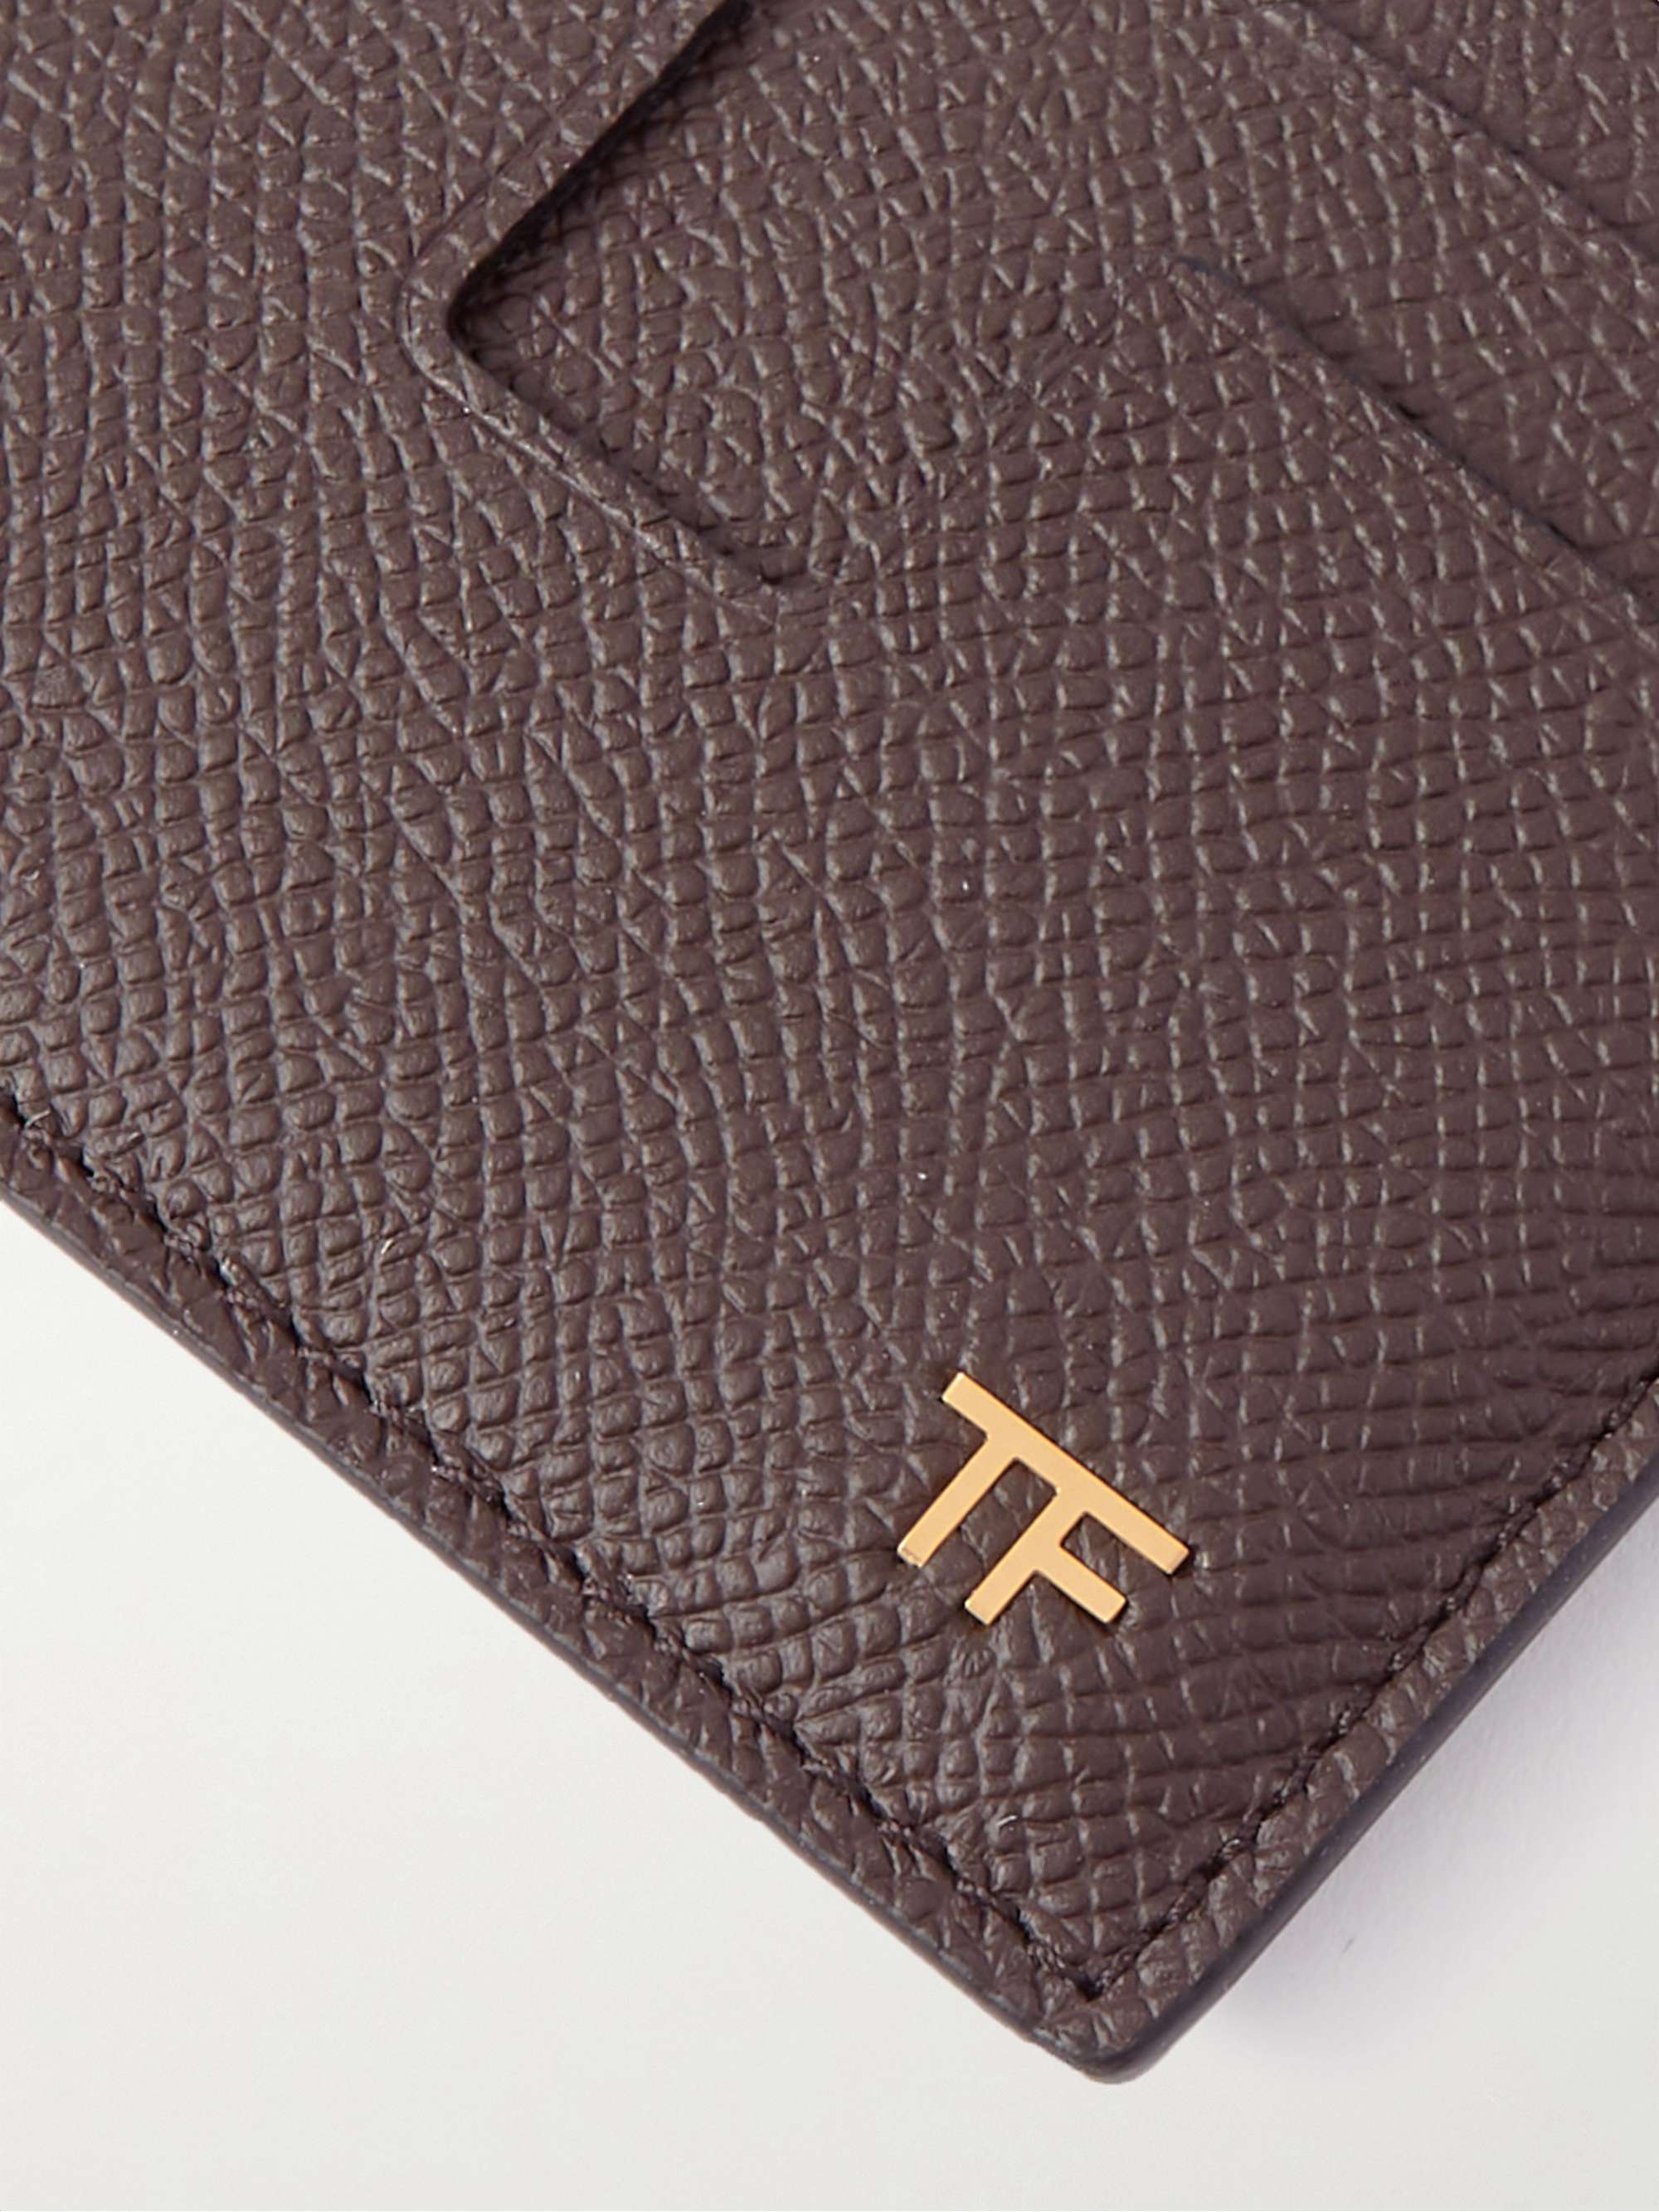 TOM FORD Full-Grain Leather Cardholder with Money Clip